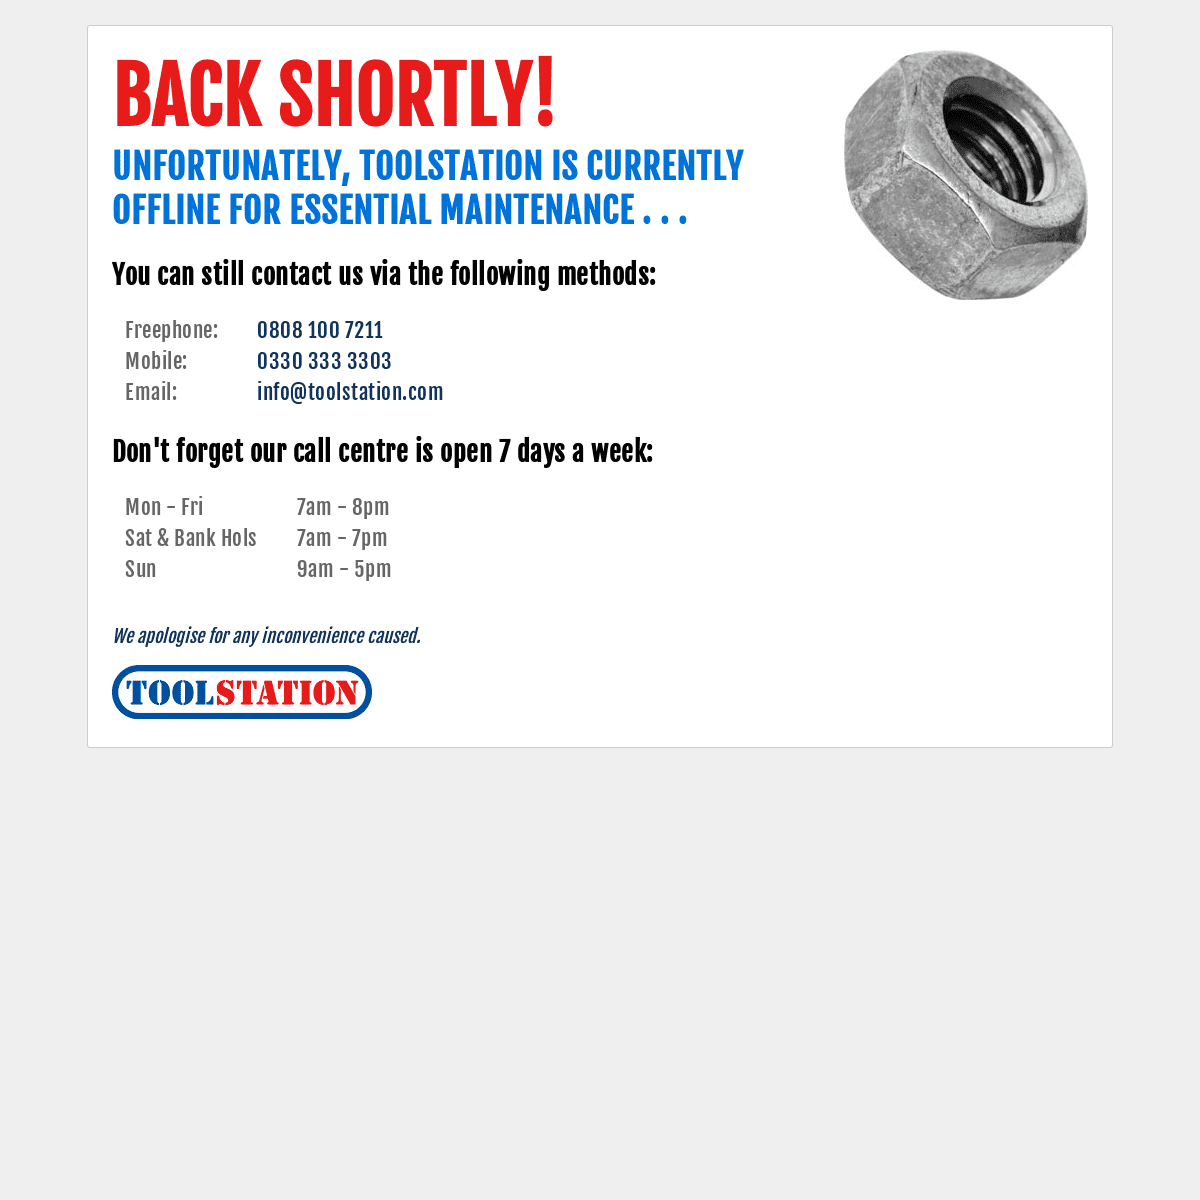 Toolstation is currently offline for essential maintenance